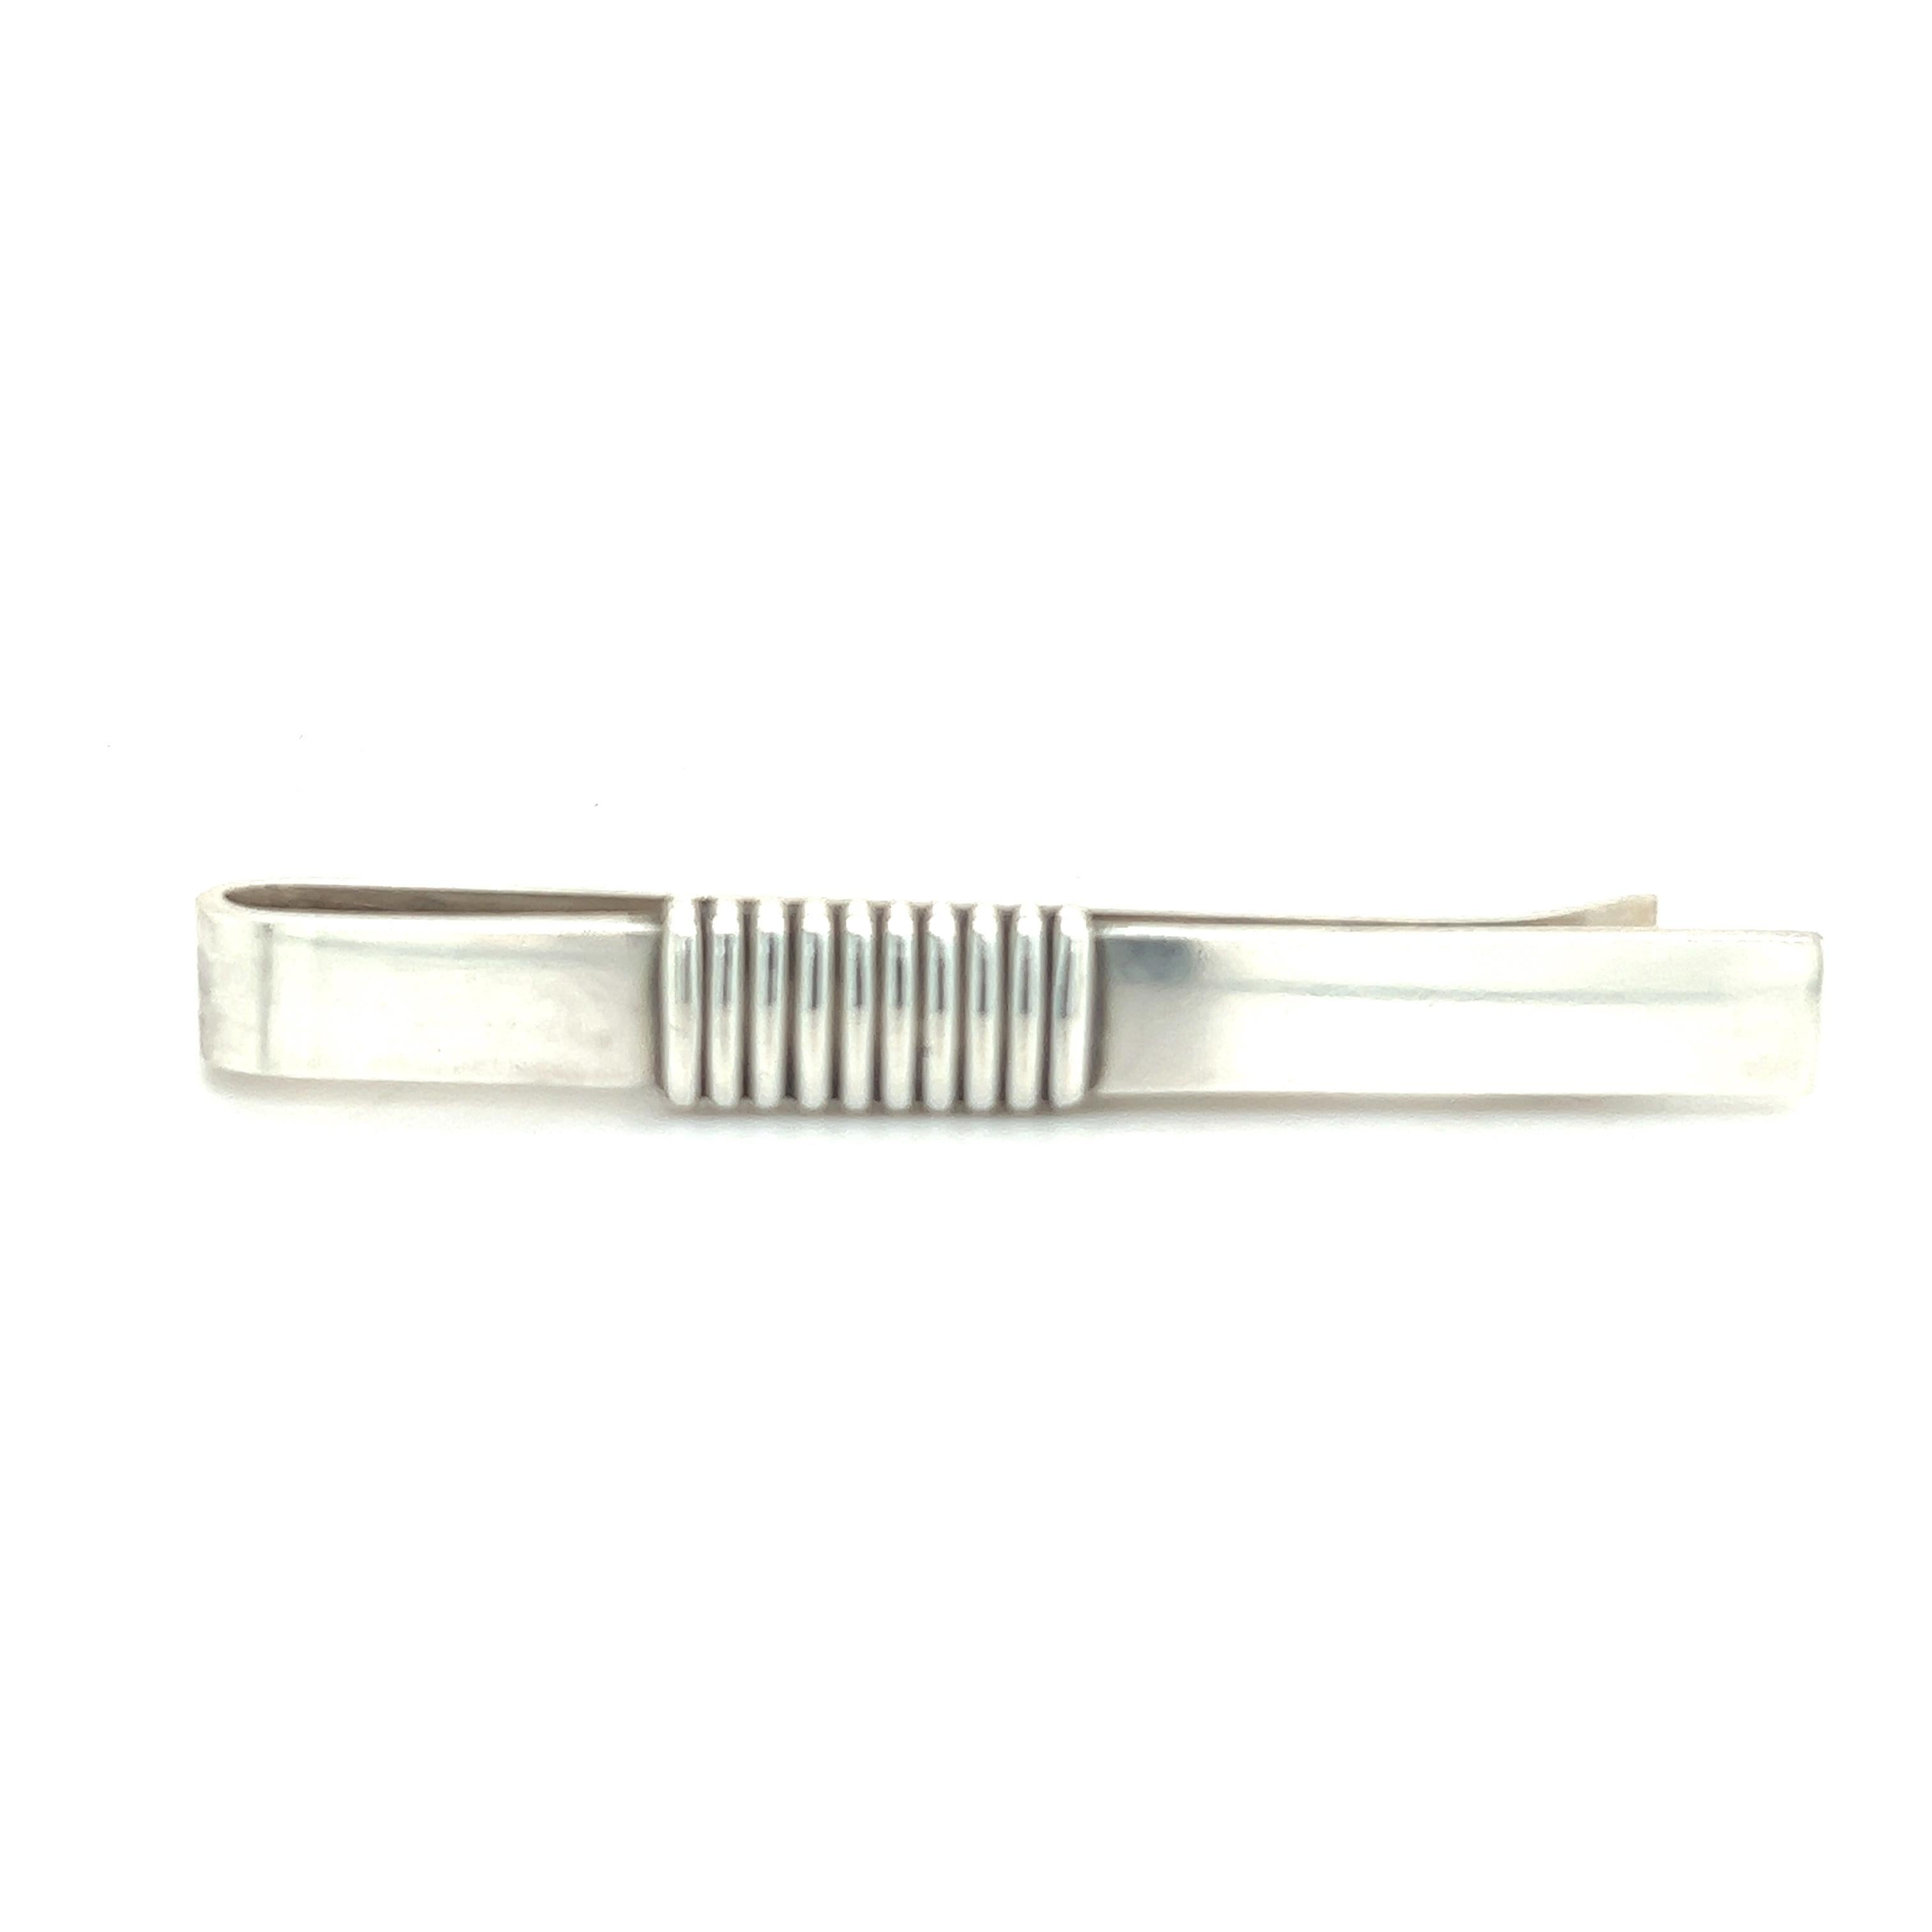 Authentic Georg Jensen Estate Money Clip Tie Bar Silver GJ13

This elegant Authentic Georg Jensen Men's Money Clip Tie Bar is made of sterling silver and has a weight of 8.95 grams.

TRUSTED SELLER SINCE 2002

PLEASE SEE OUR HUNDREDS OF POSITIVE